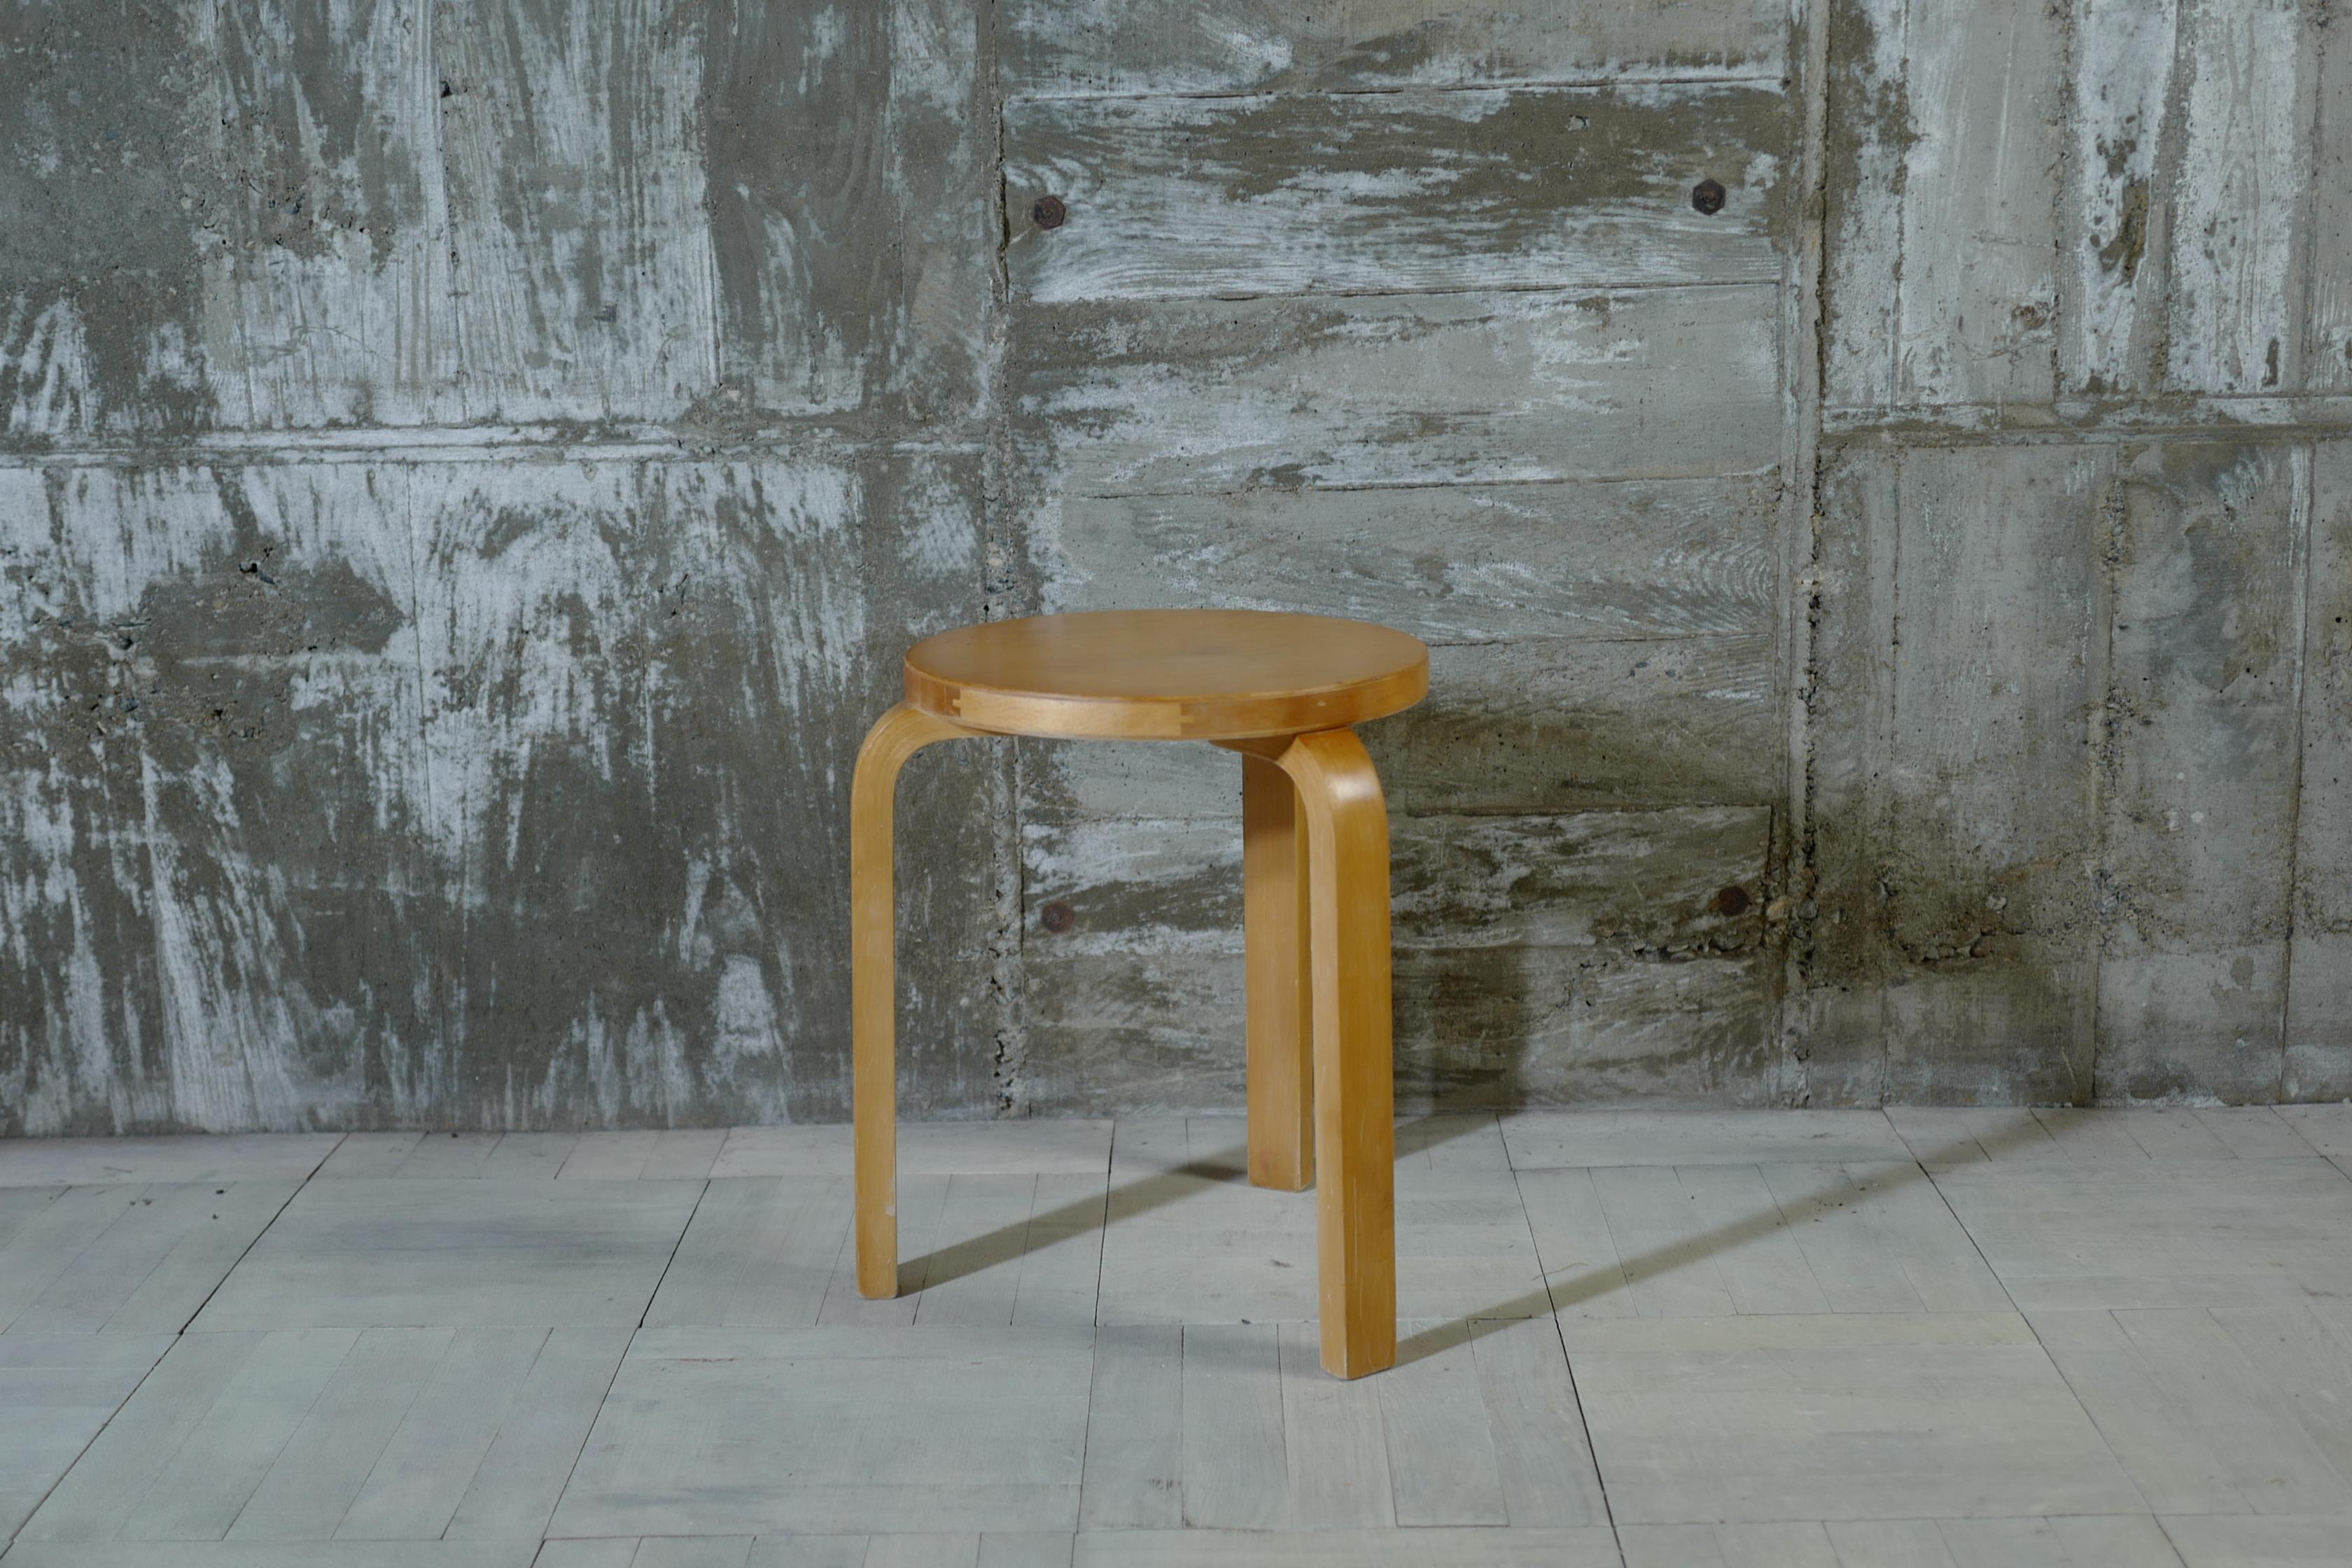 Designed by Alvar Aalto.
This stool60 was manufactured in the 1950s.